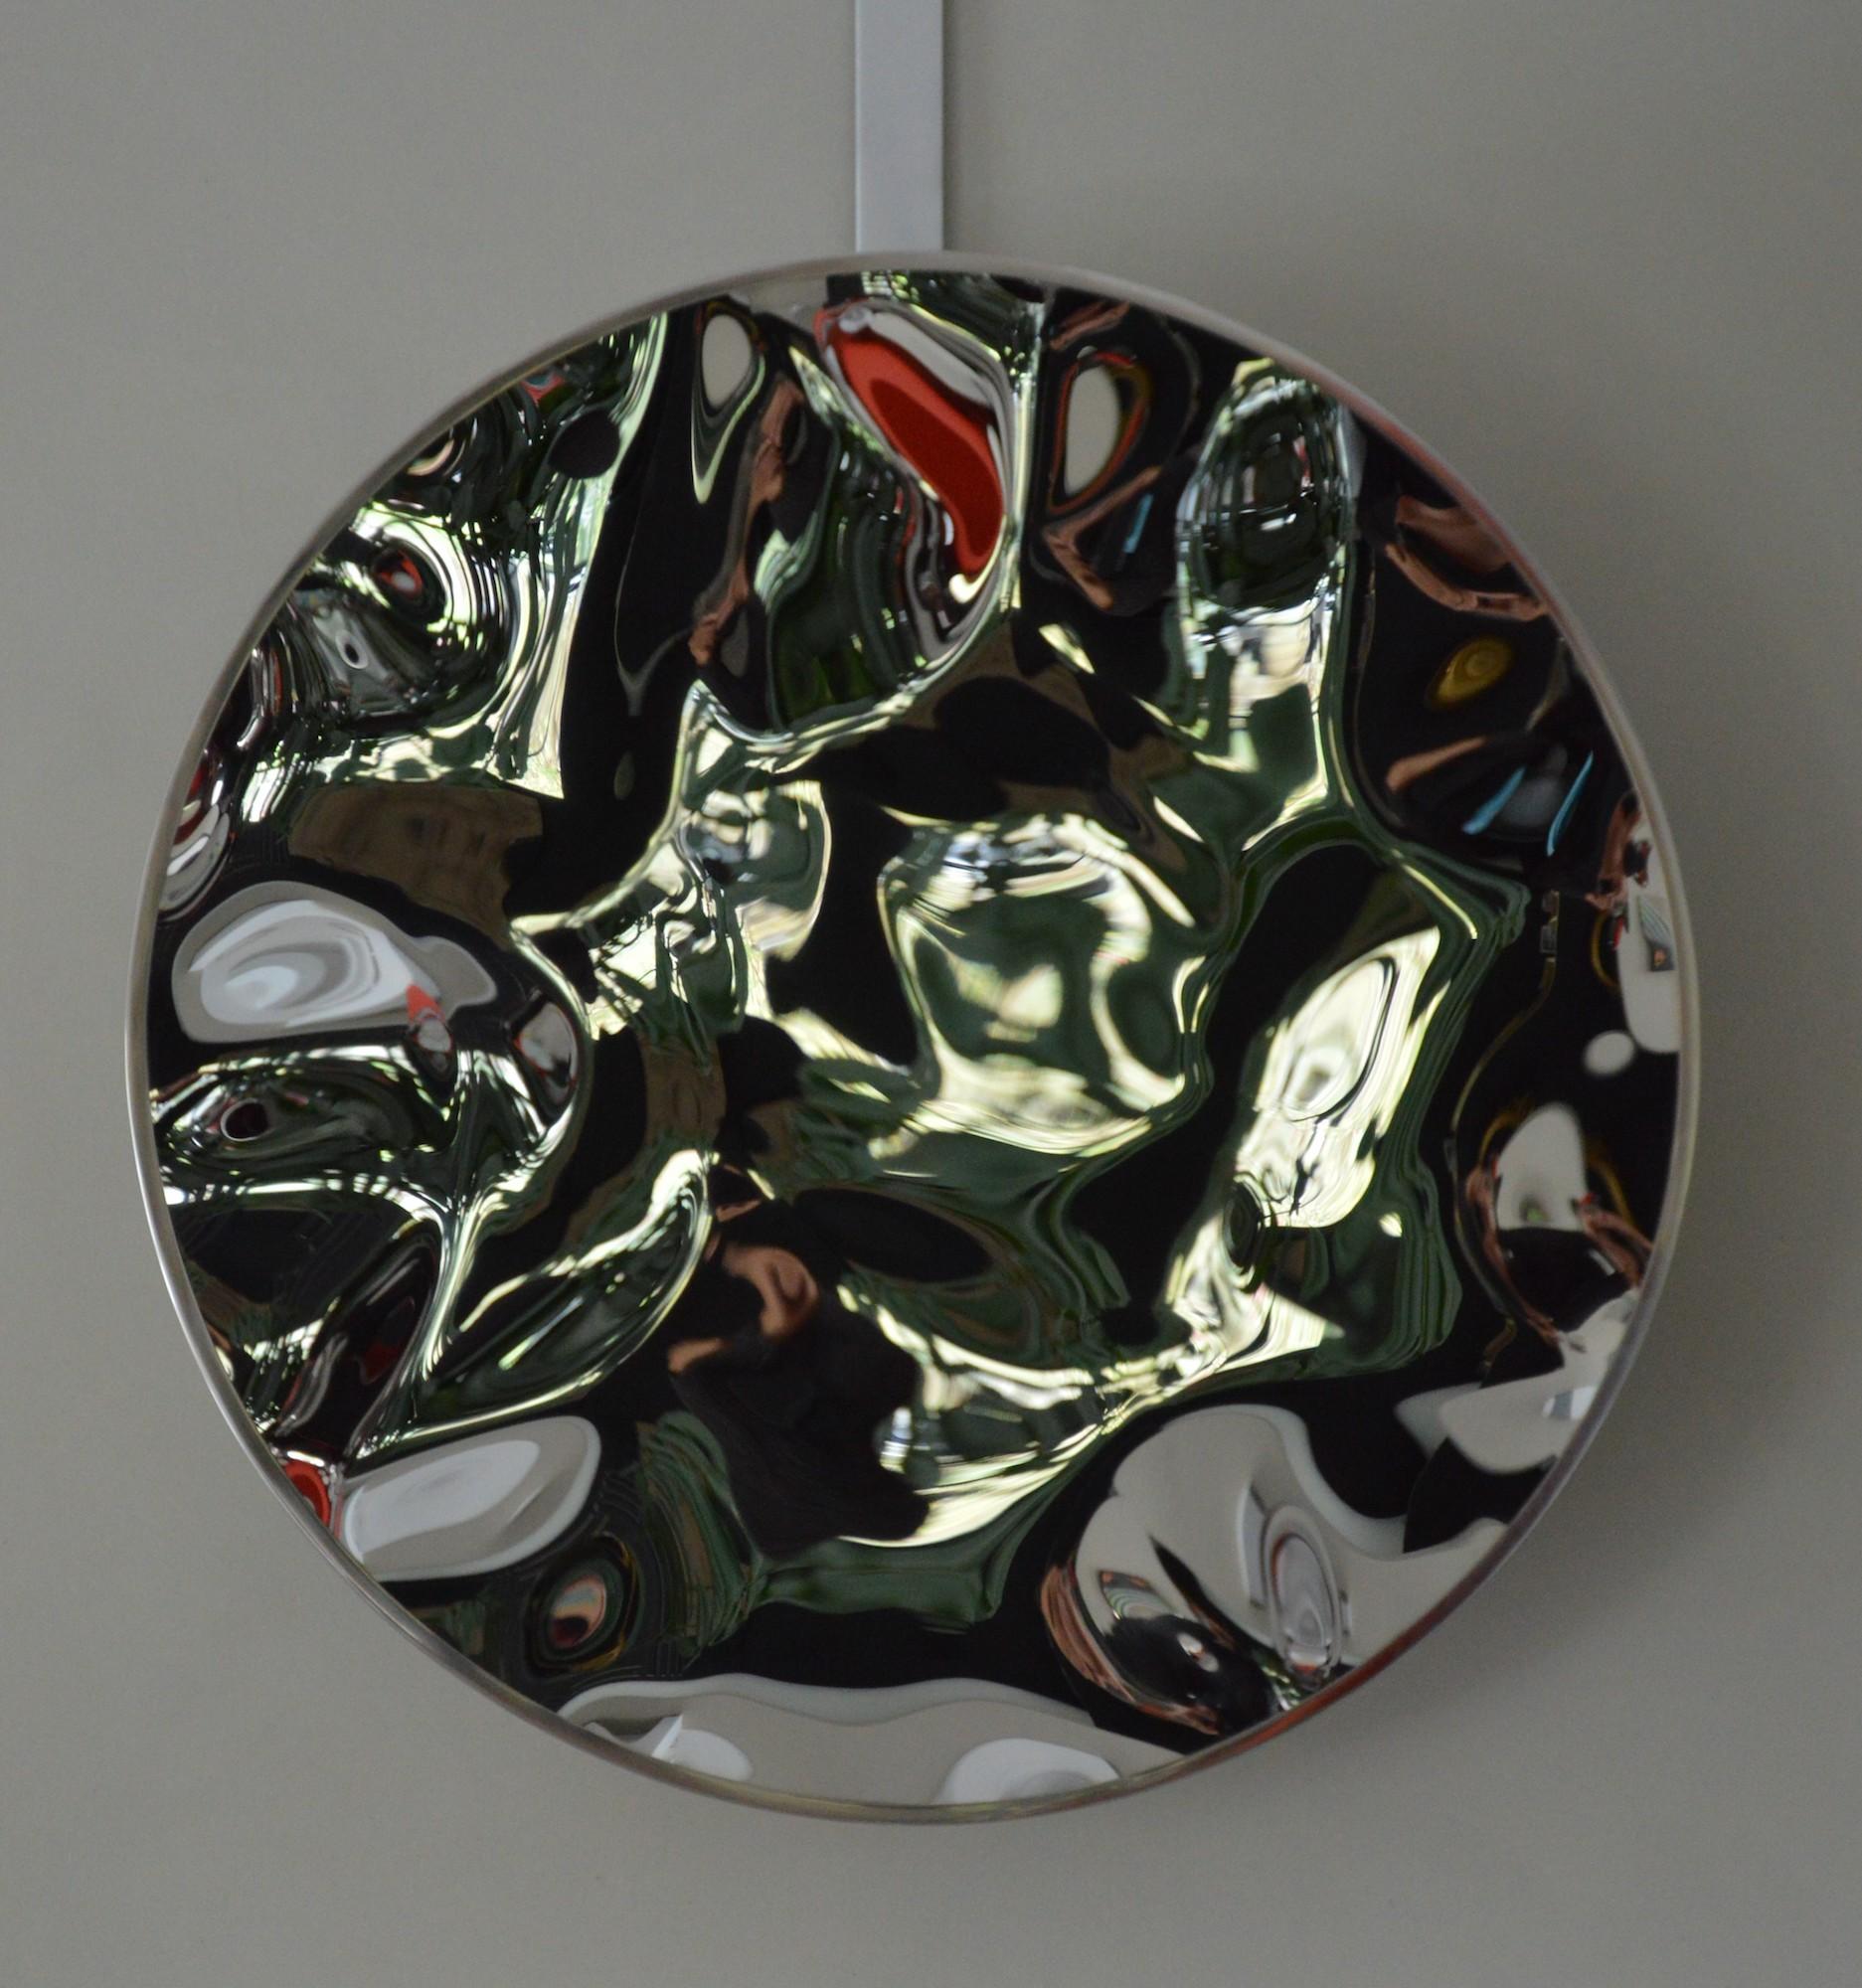 “Shattered” wall mirror III by Franck K - Stainless steel sculpture, reflection For Sale 1